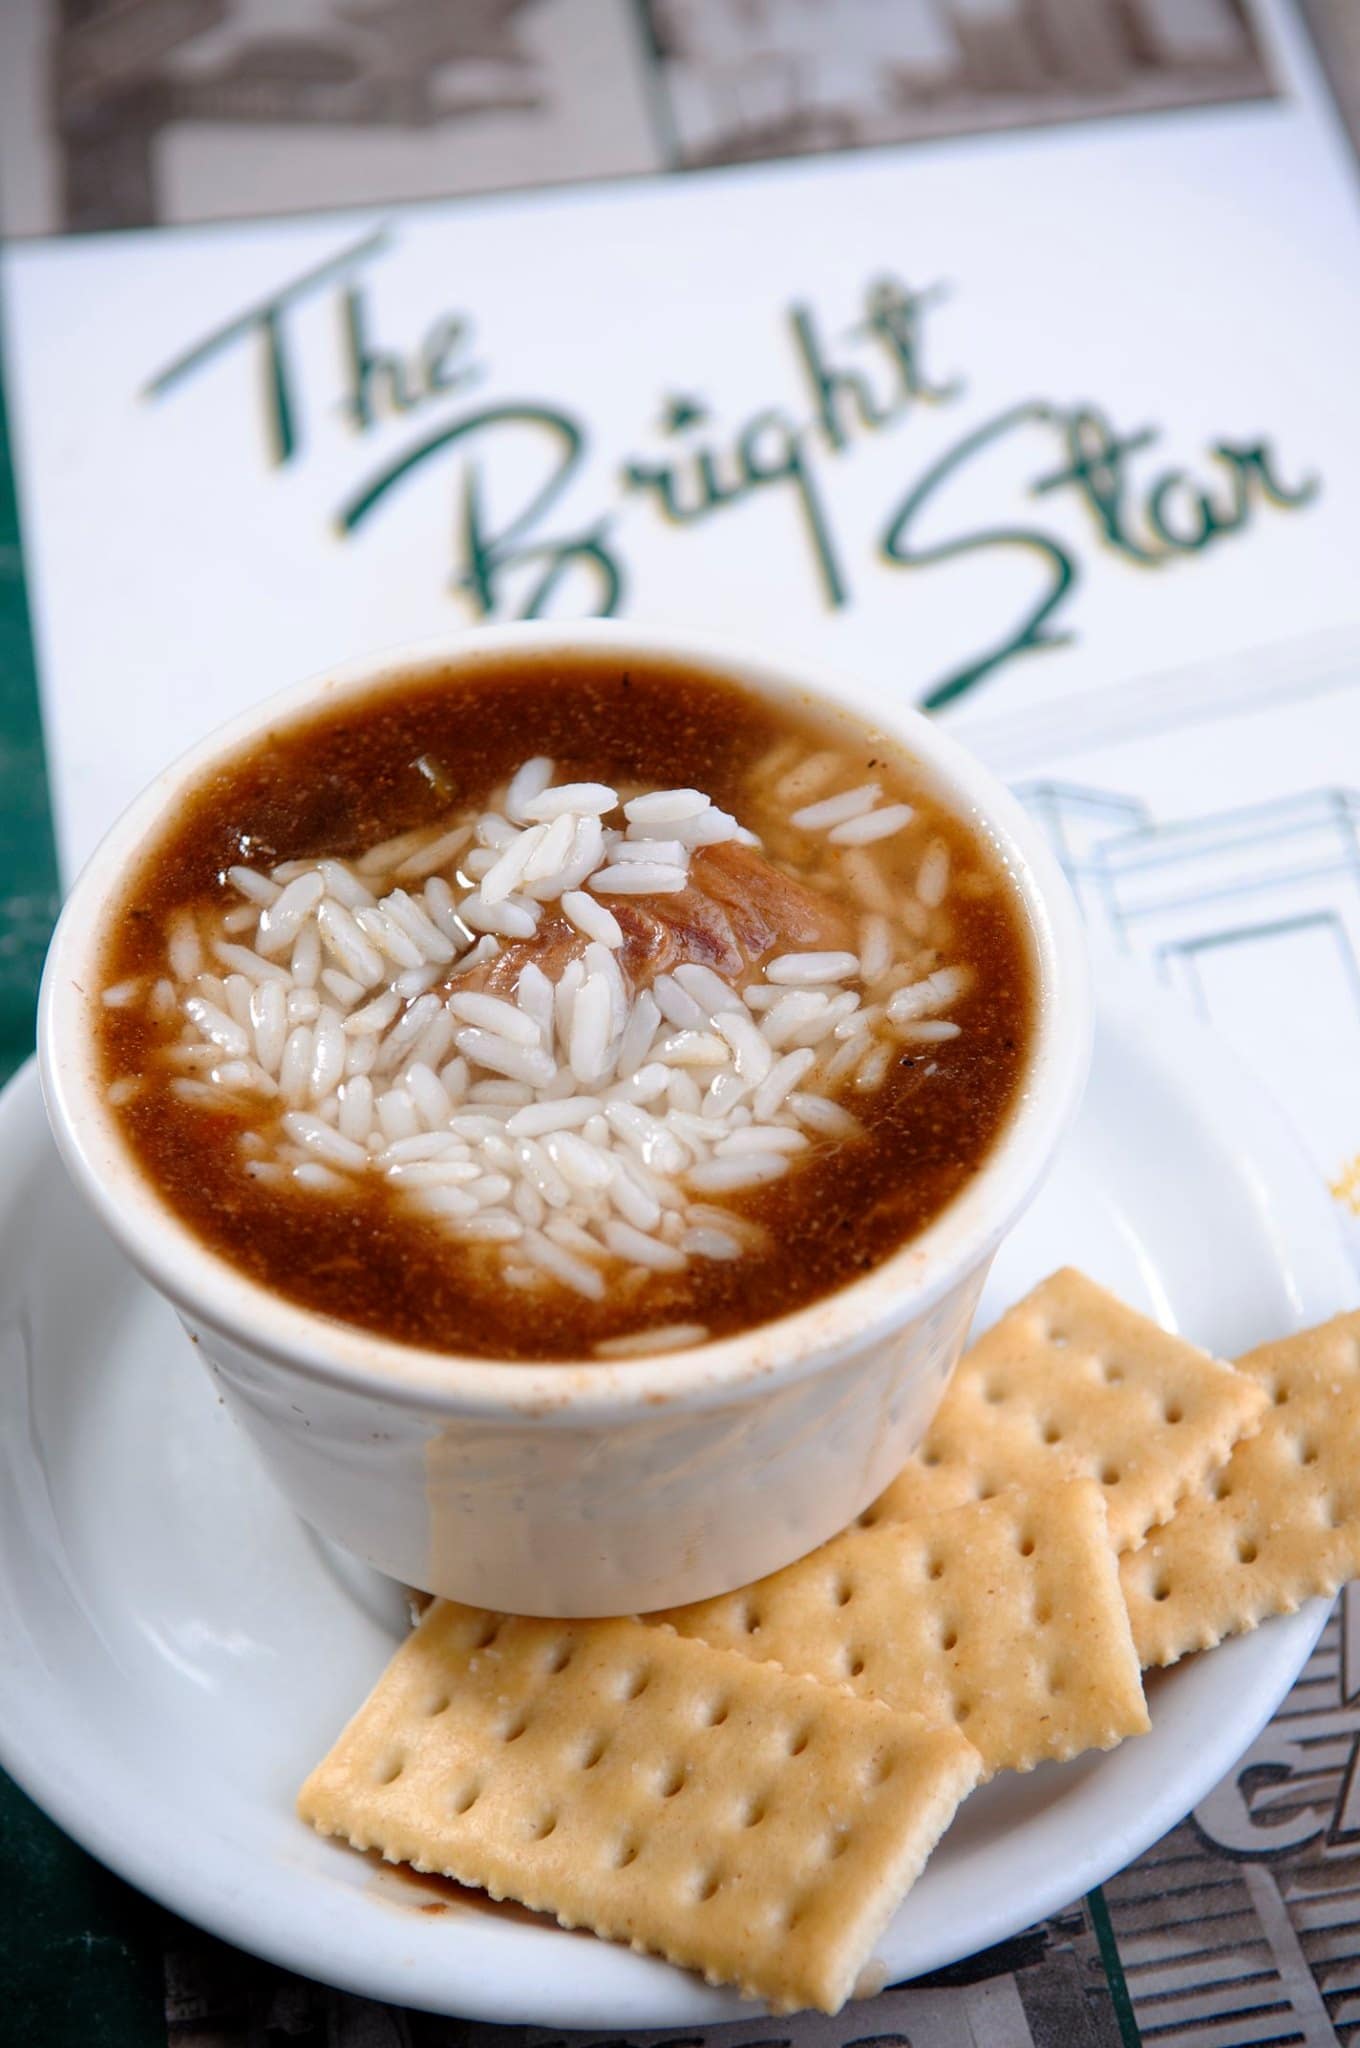 gumbo bright star 5 spots to grab a warm bowl of gumbo for National Gumbo Day, Oct. 13